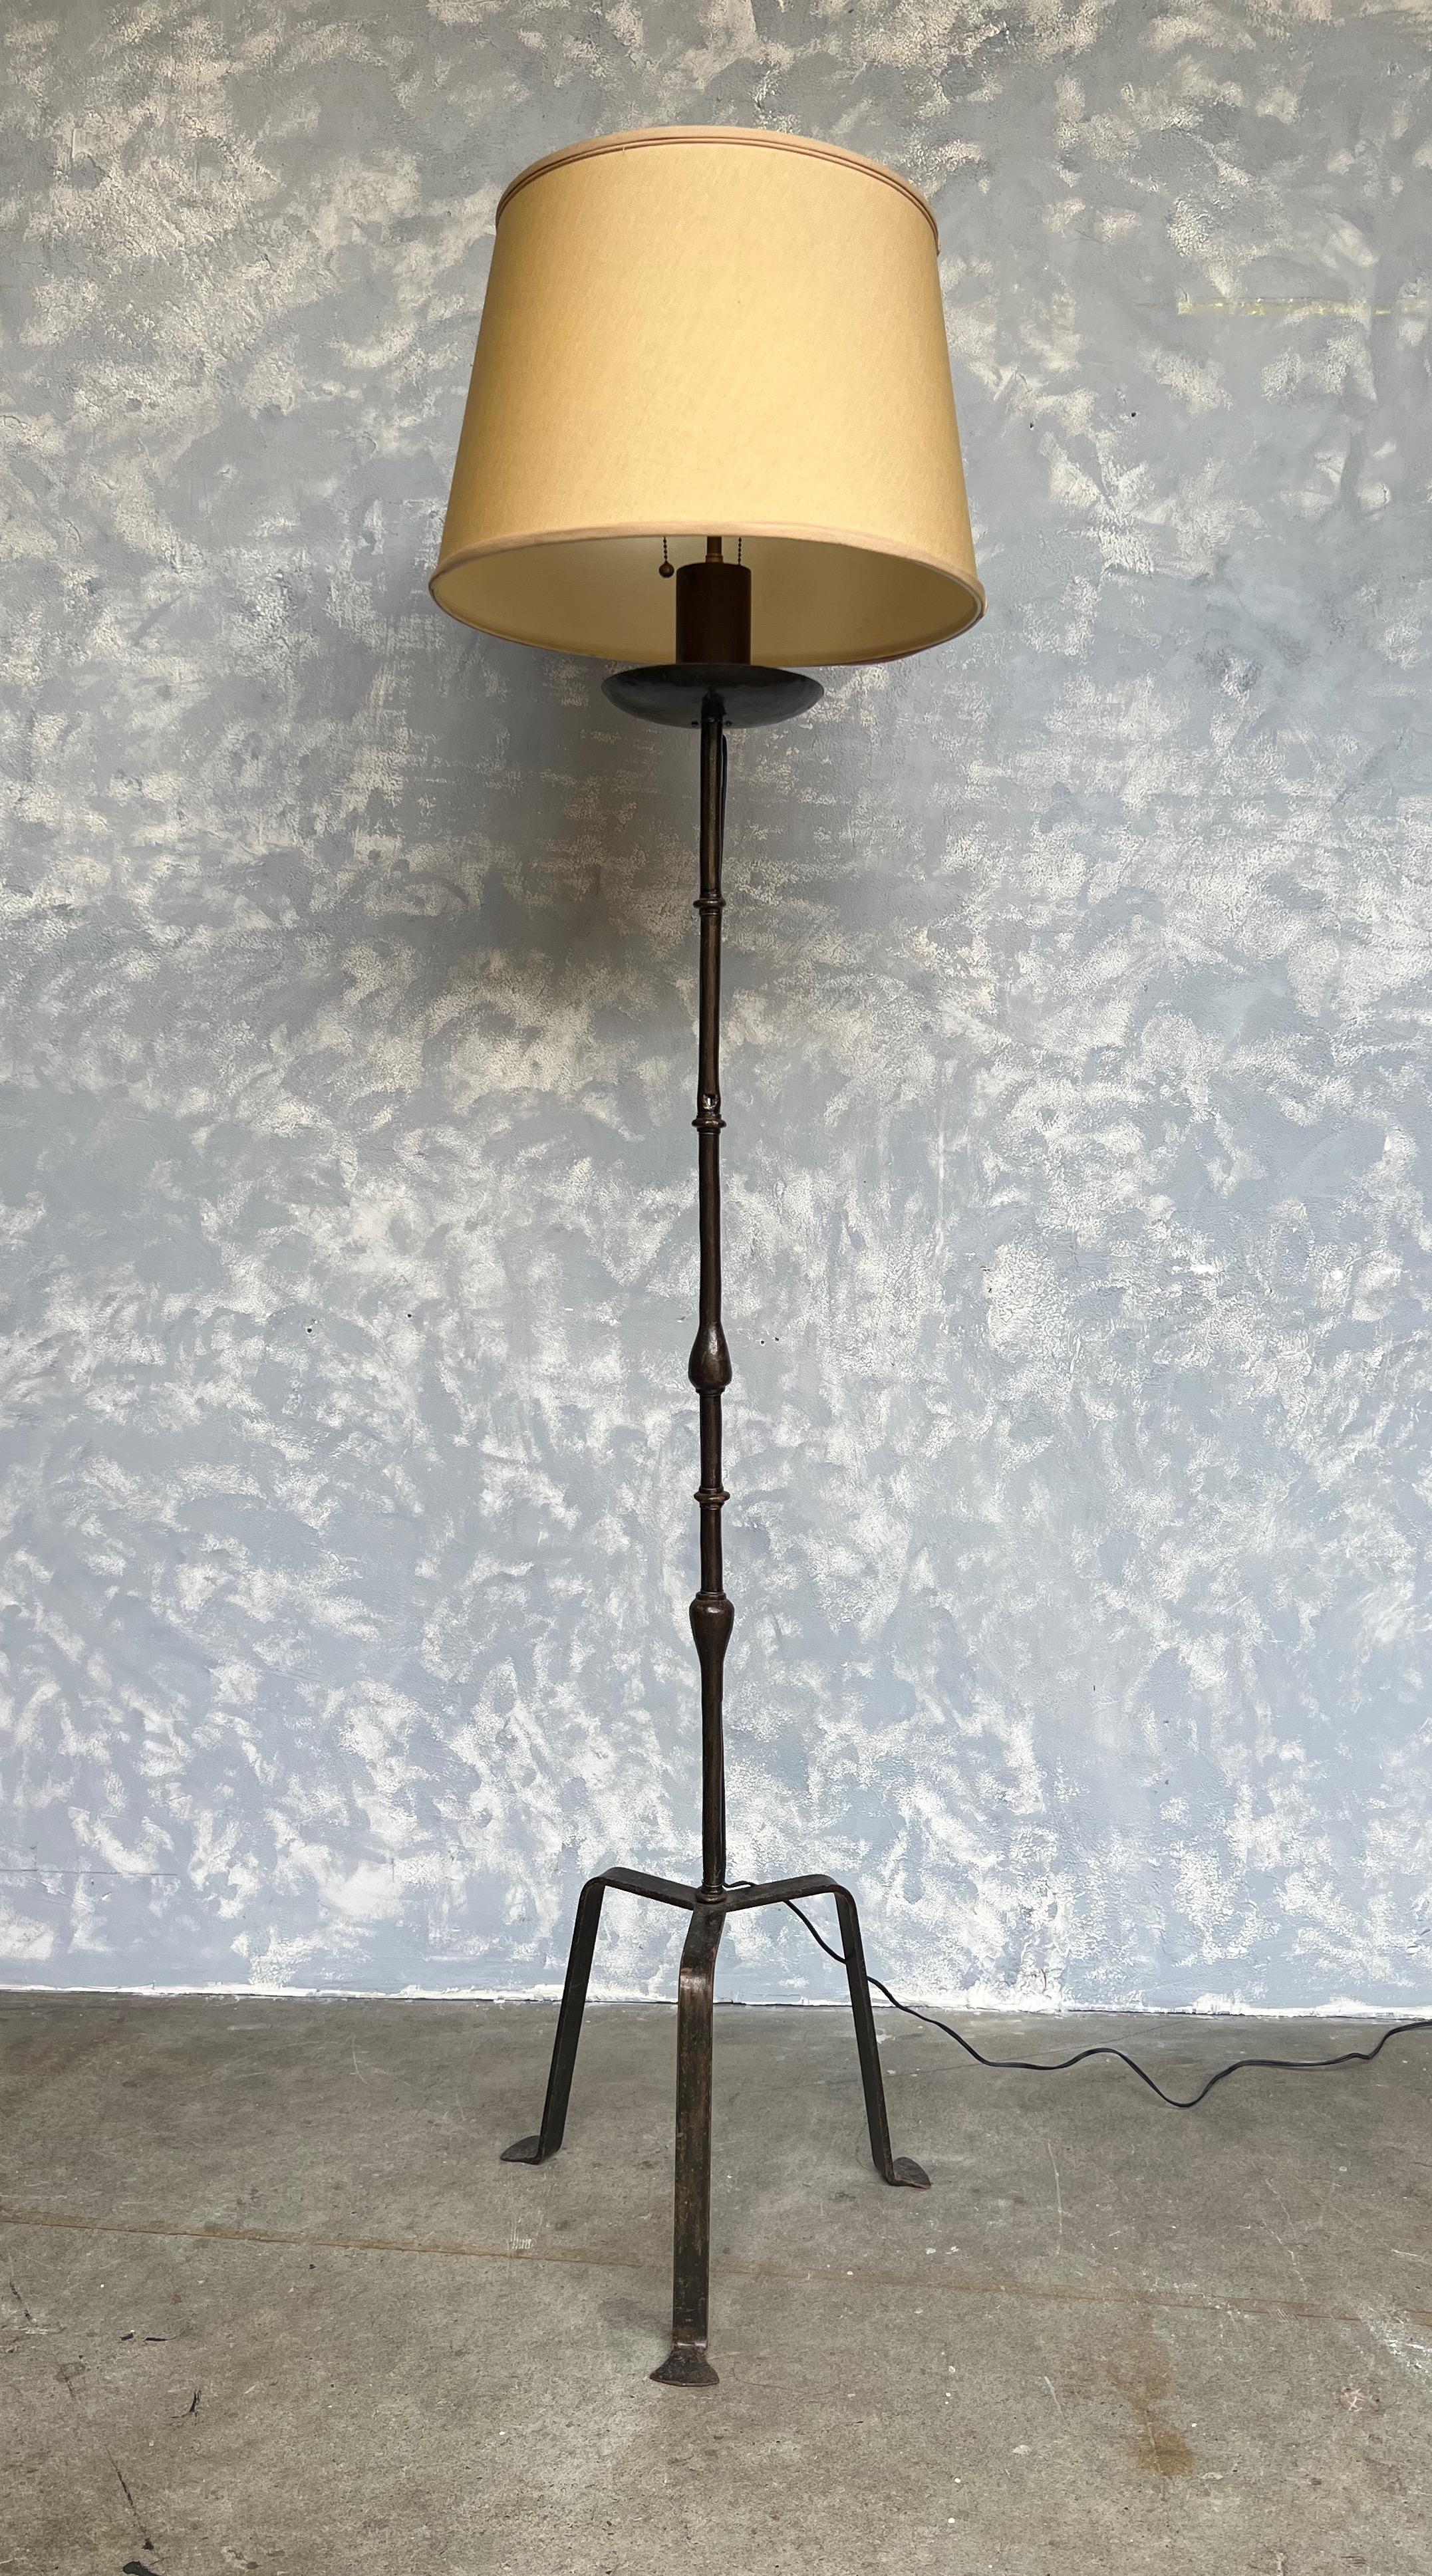 This exceptional Spanish floor lamp from the 1950s stands on an elongated tripod base, showcasing its remarkable design. Constructed with solid iron, the lamp features a rich deep bronze patina with a clear lacquer coat to prevent tarnishing. The